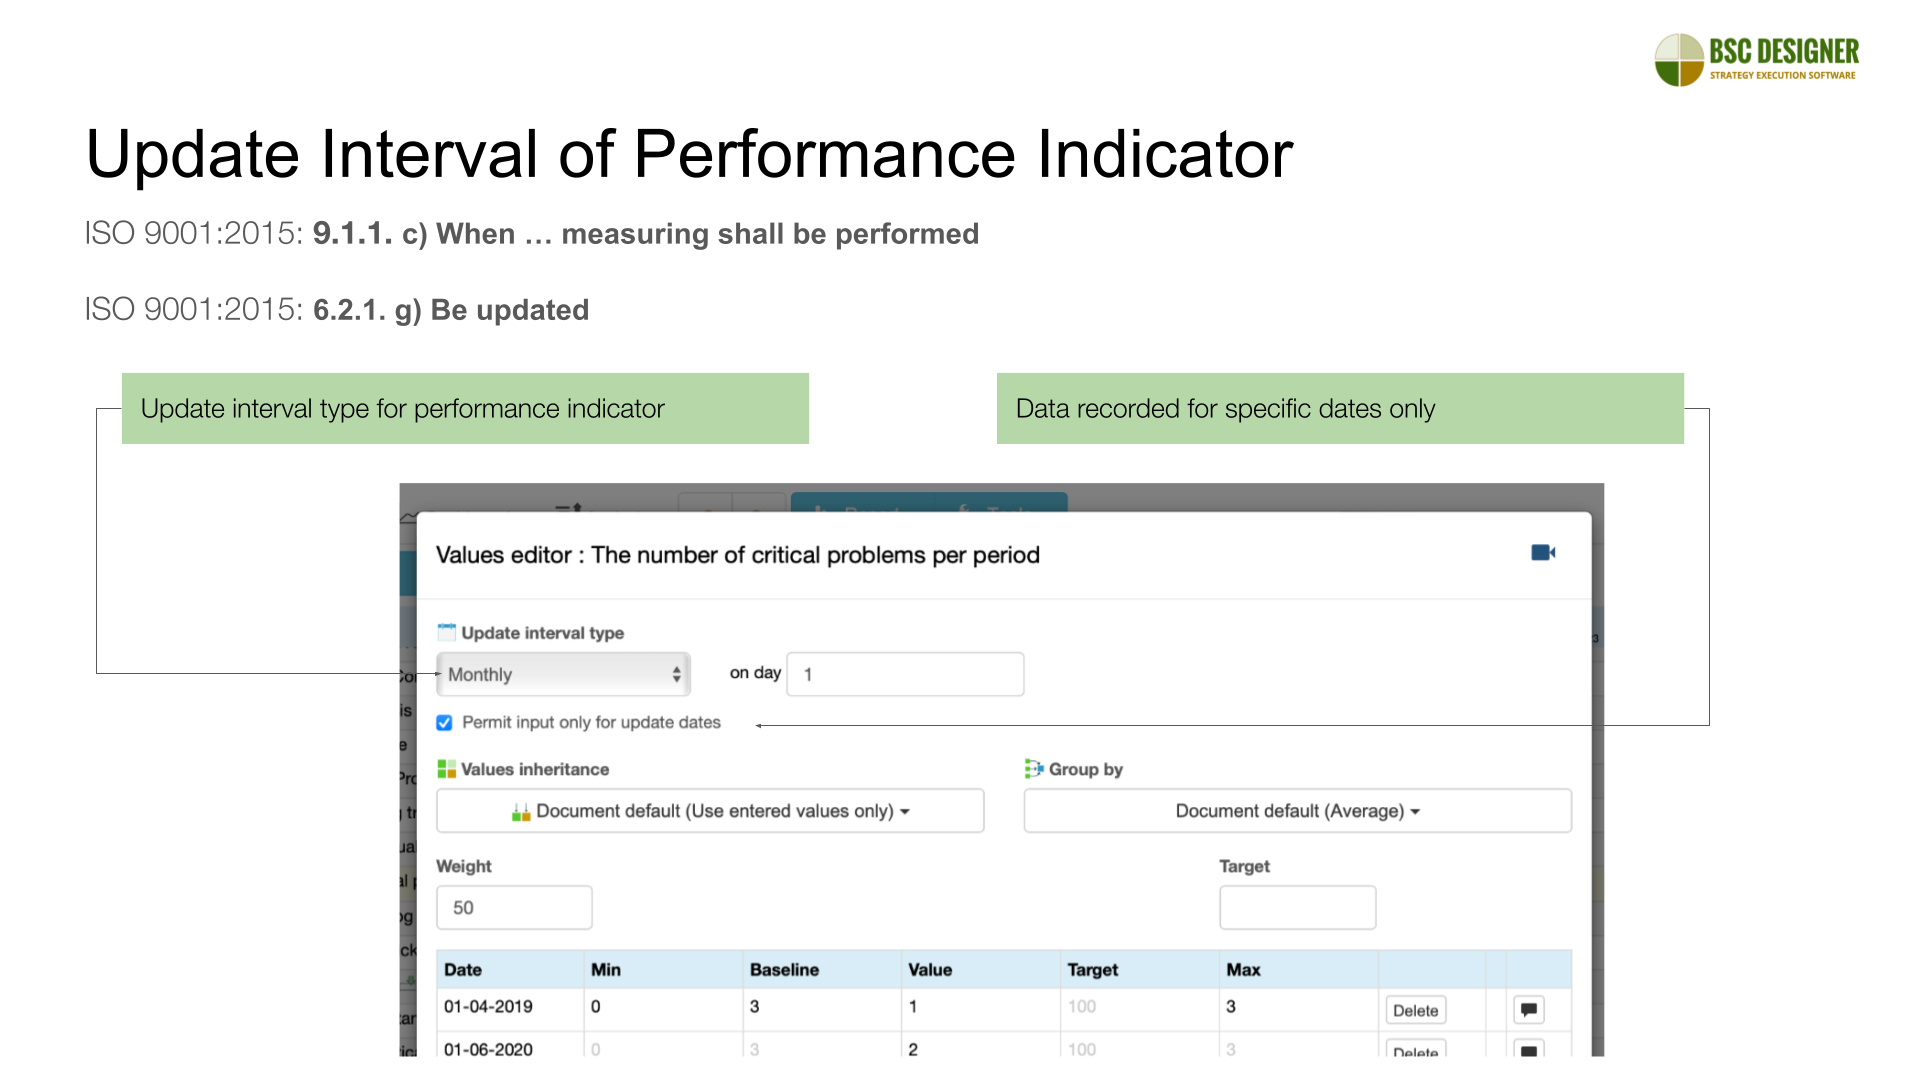 Update Interval of Performance Indicator - ISO 9001:2015: 6.2.1. g) Be updated